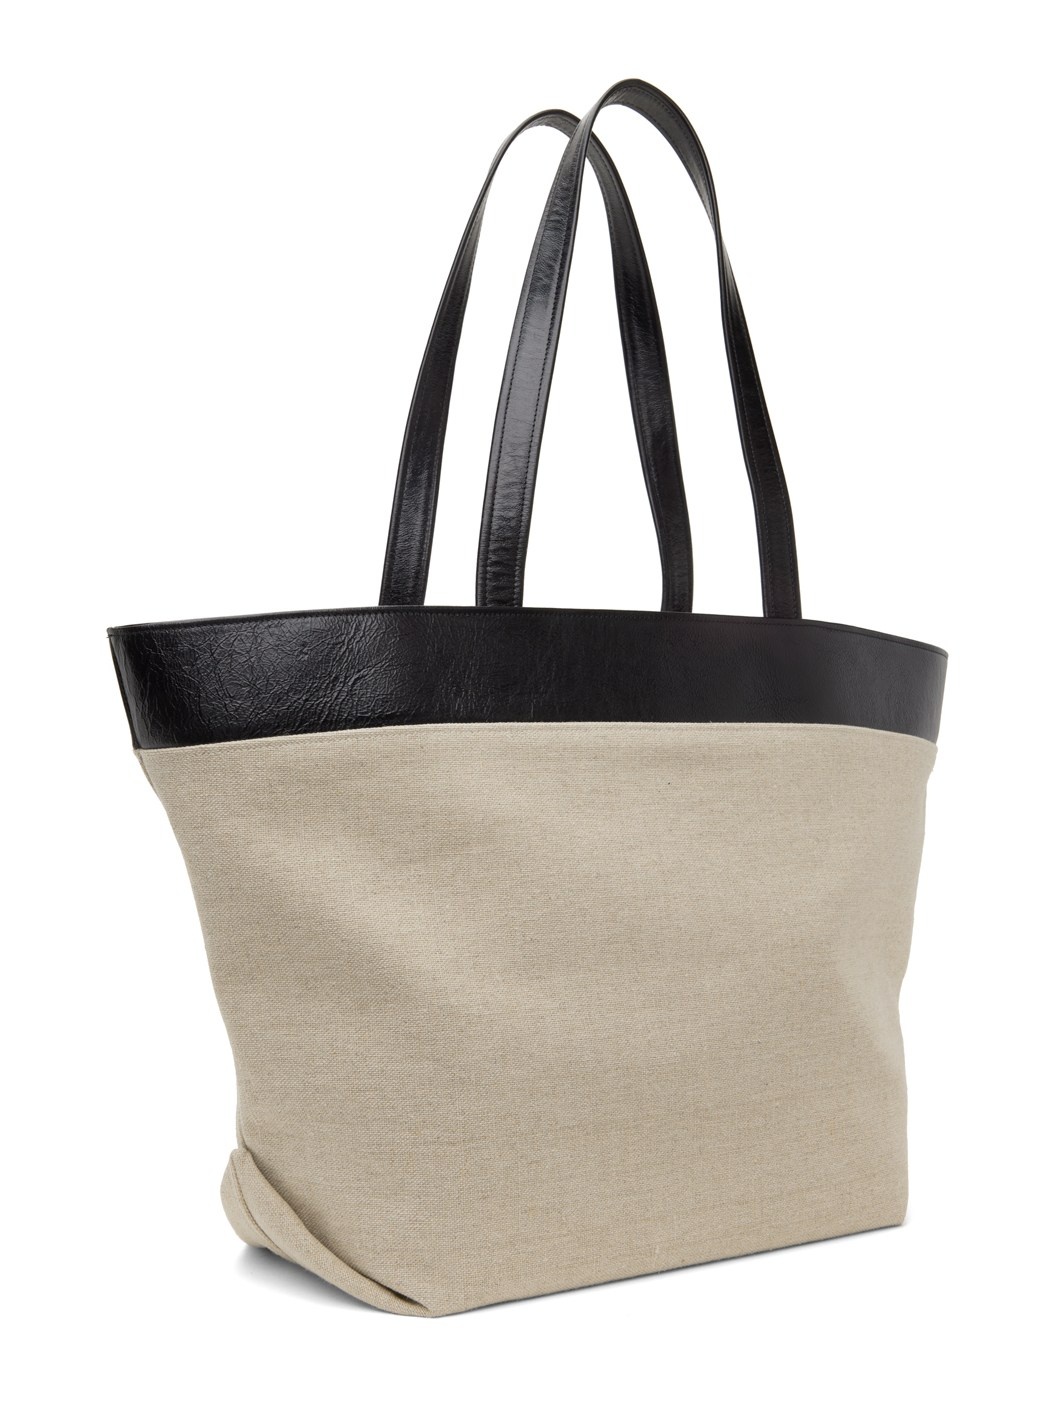 Beige East West Shopping Tote - 3